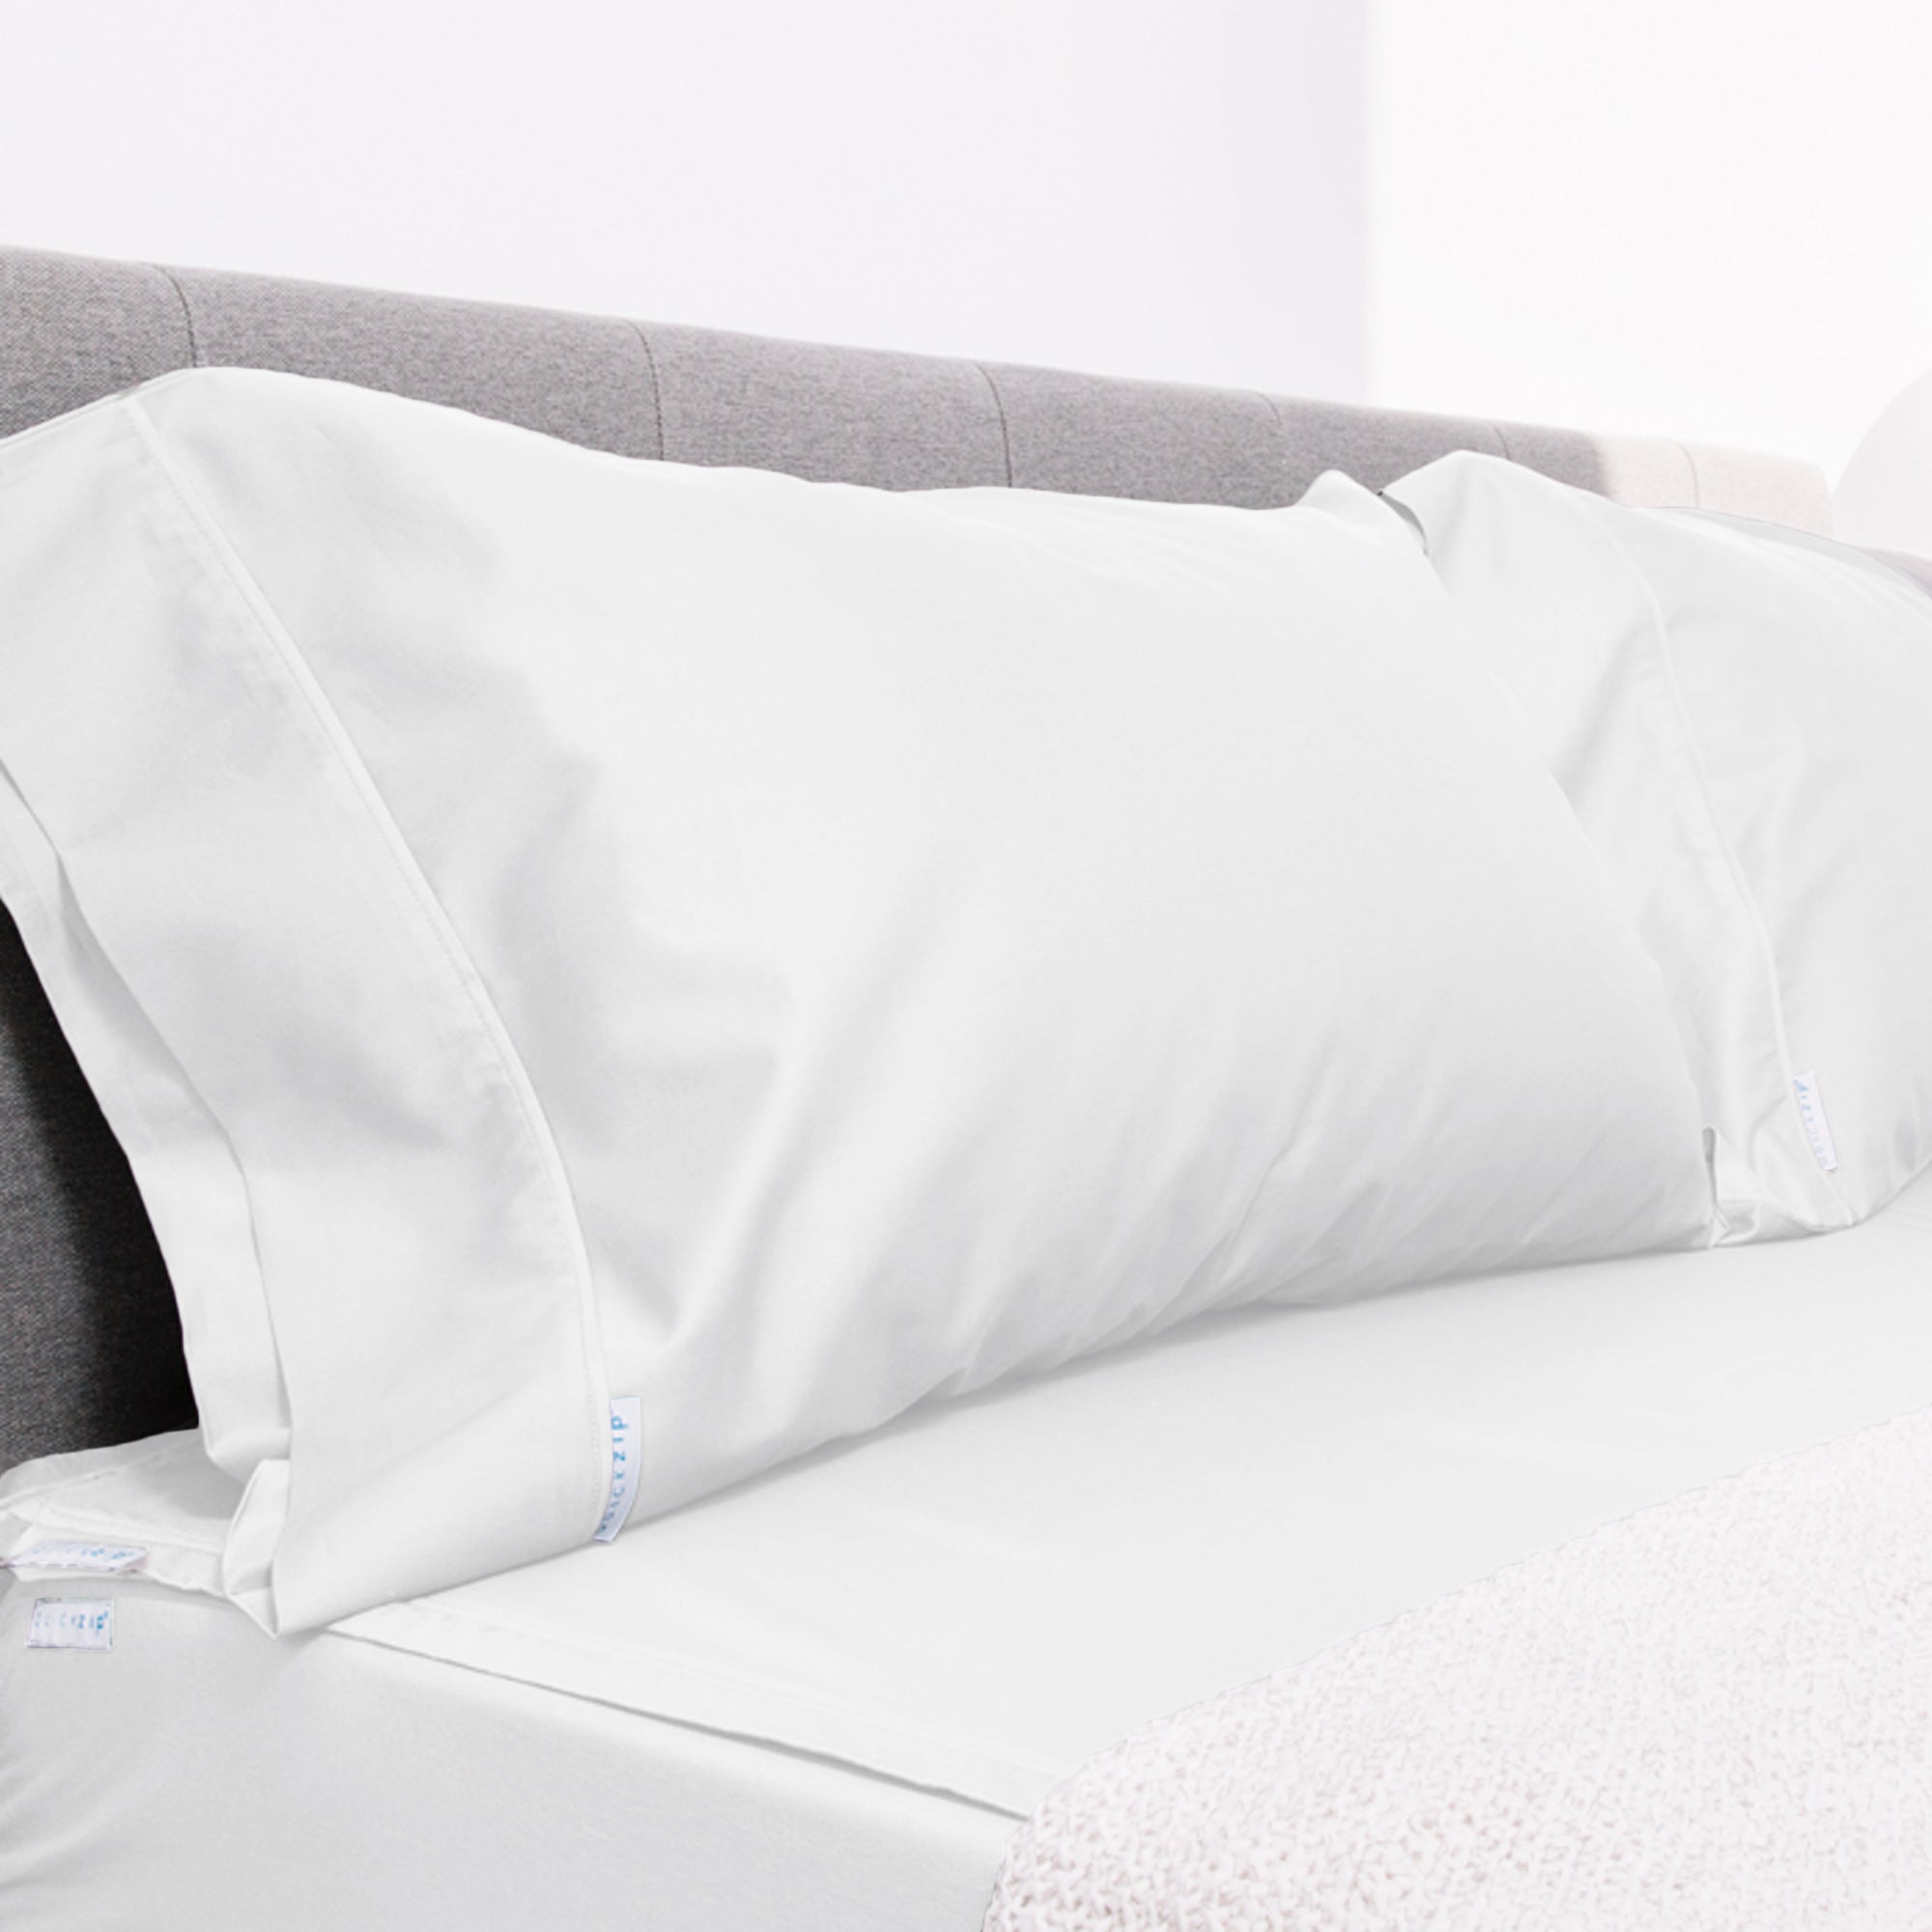 Everything you need to know about pillows (there's more than you thought).